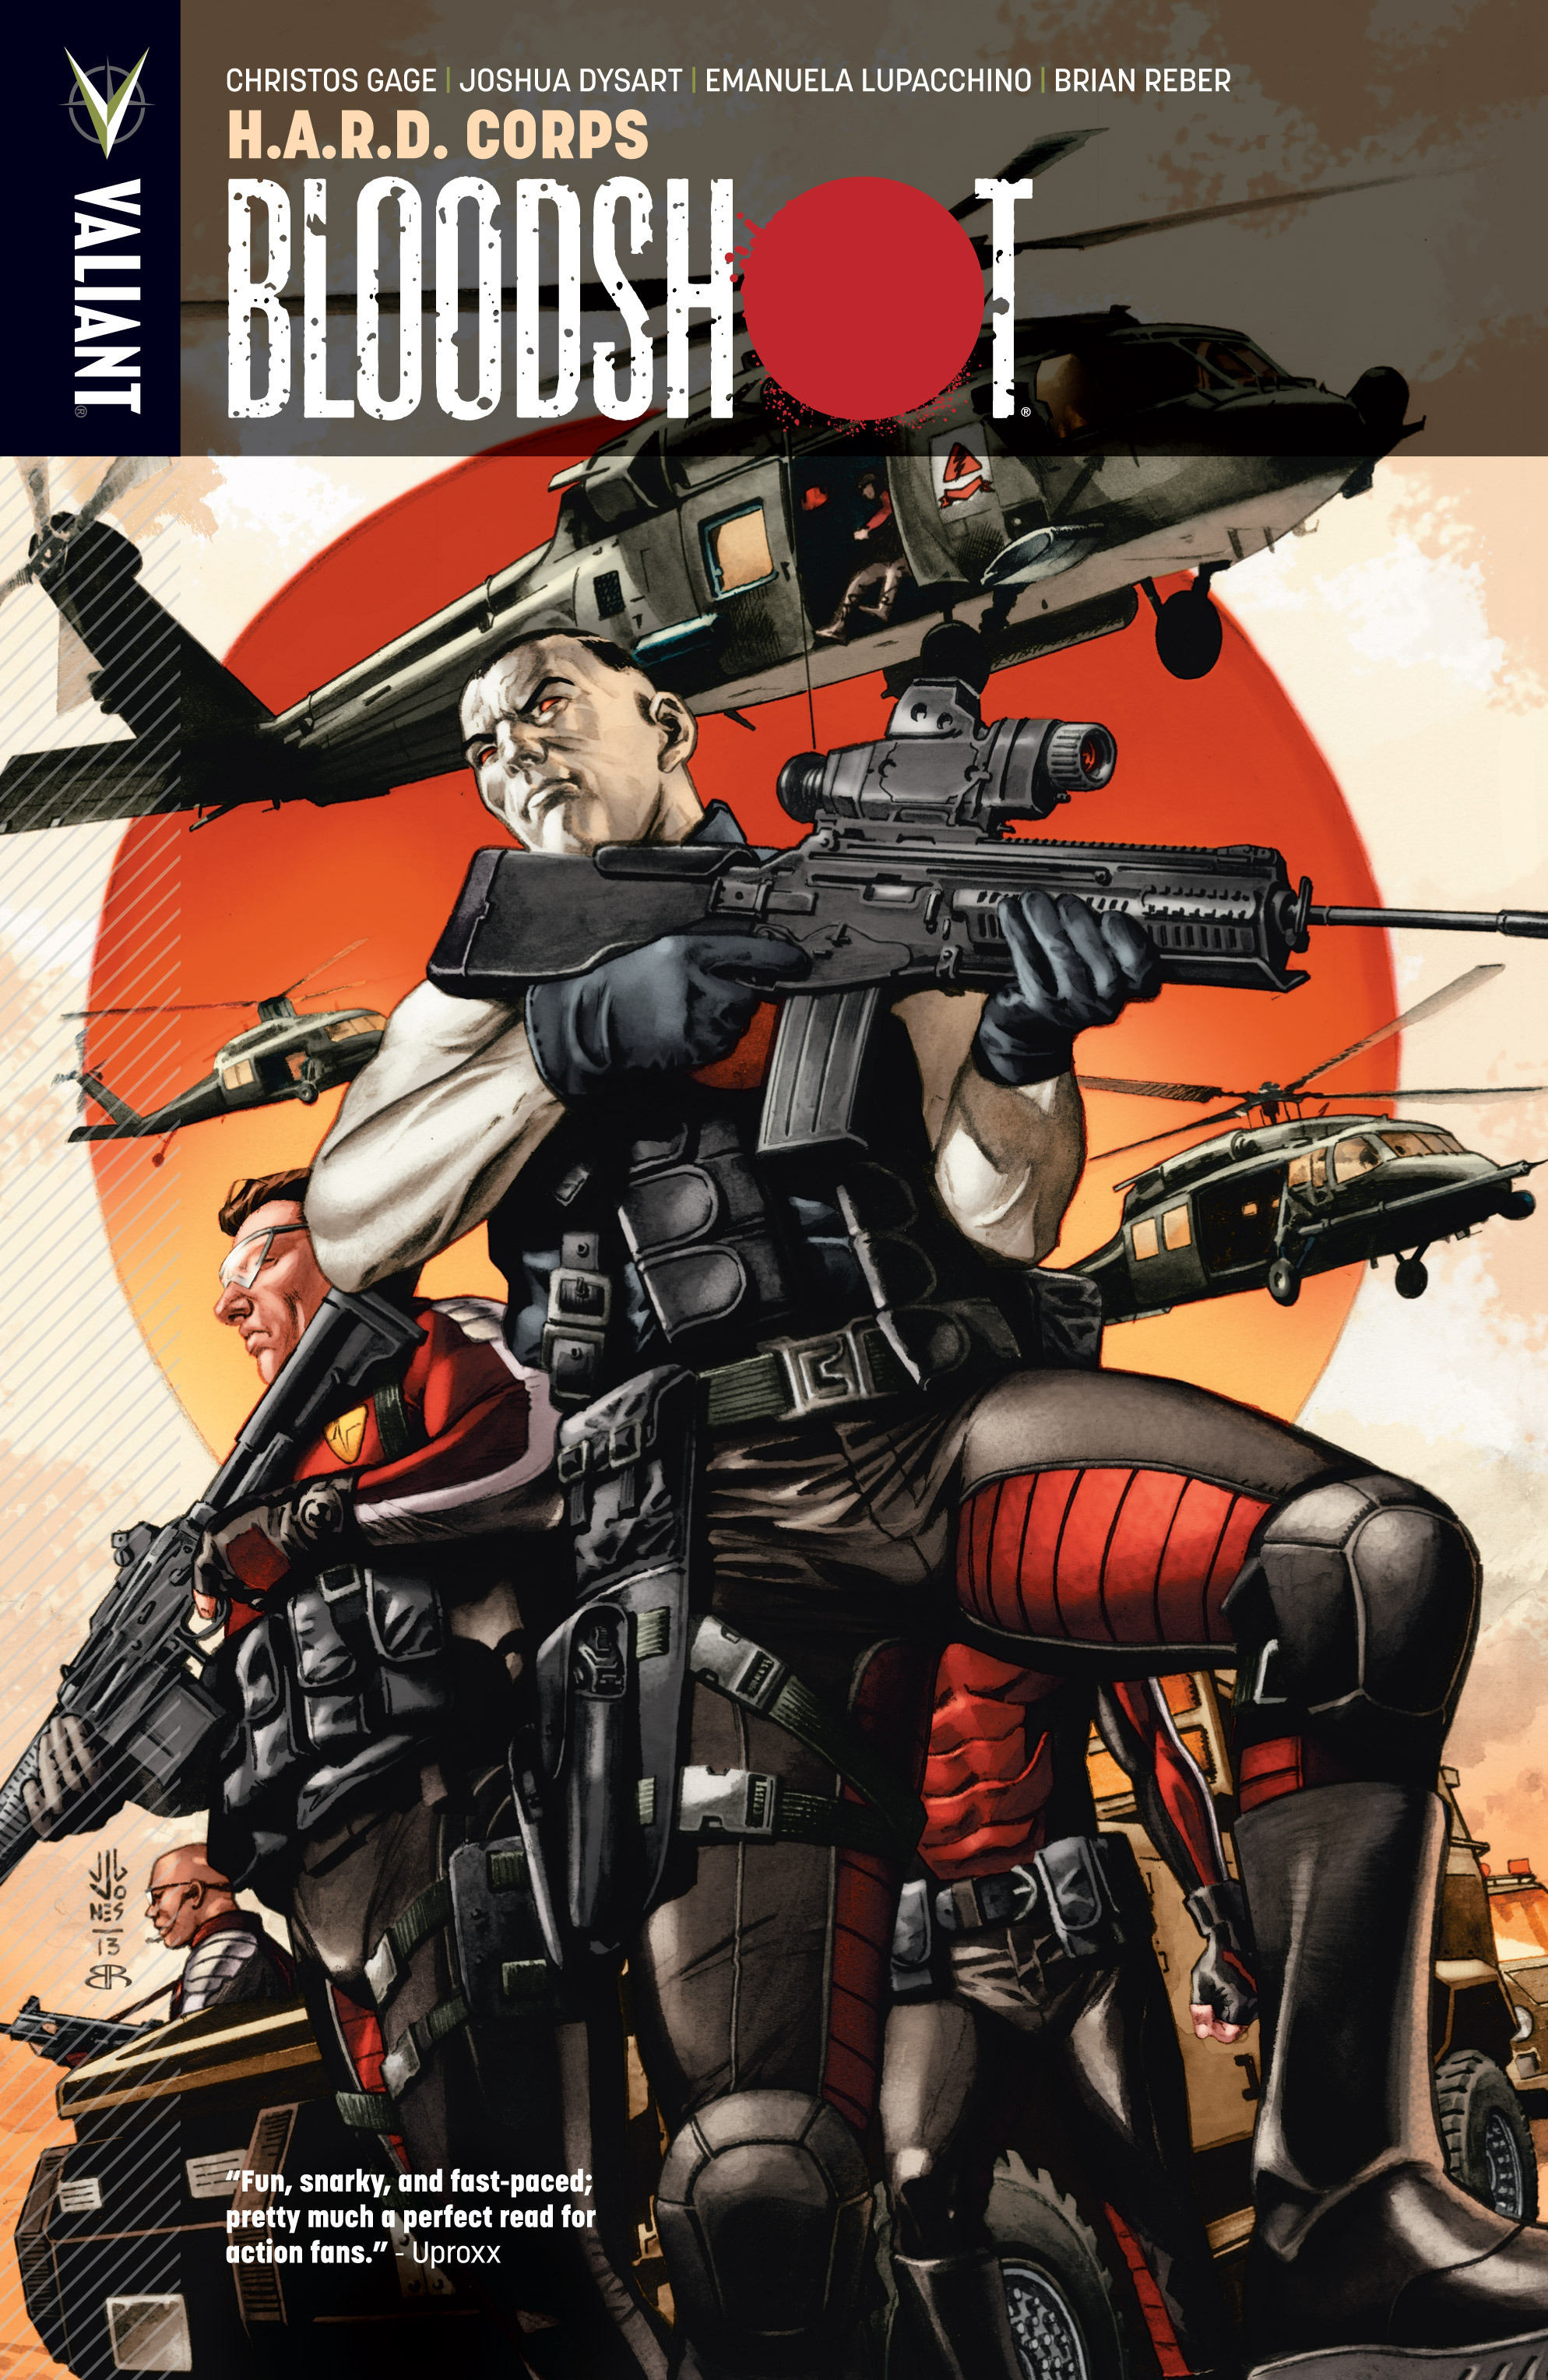 Read online Bloodshot: H.A.R.D. Corps comic -  Issue # Full - 1